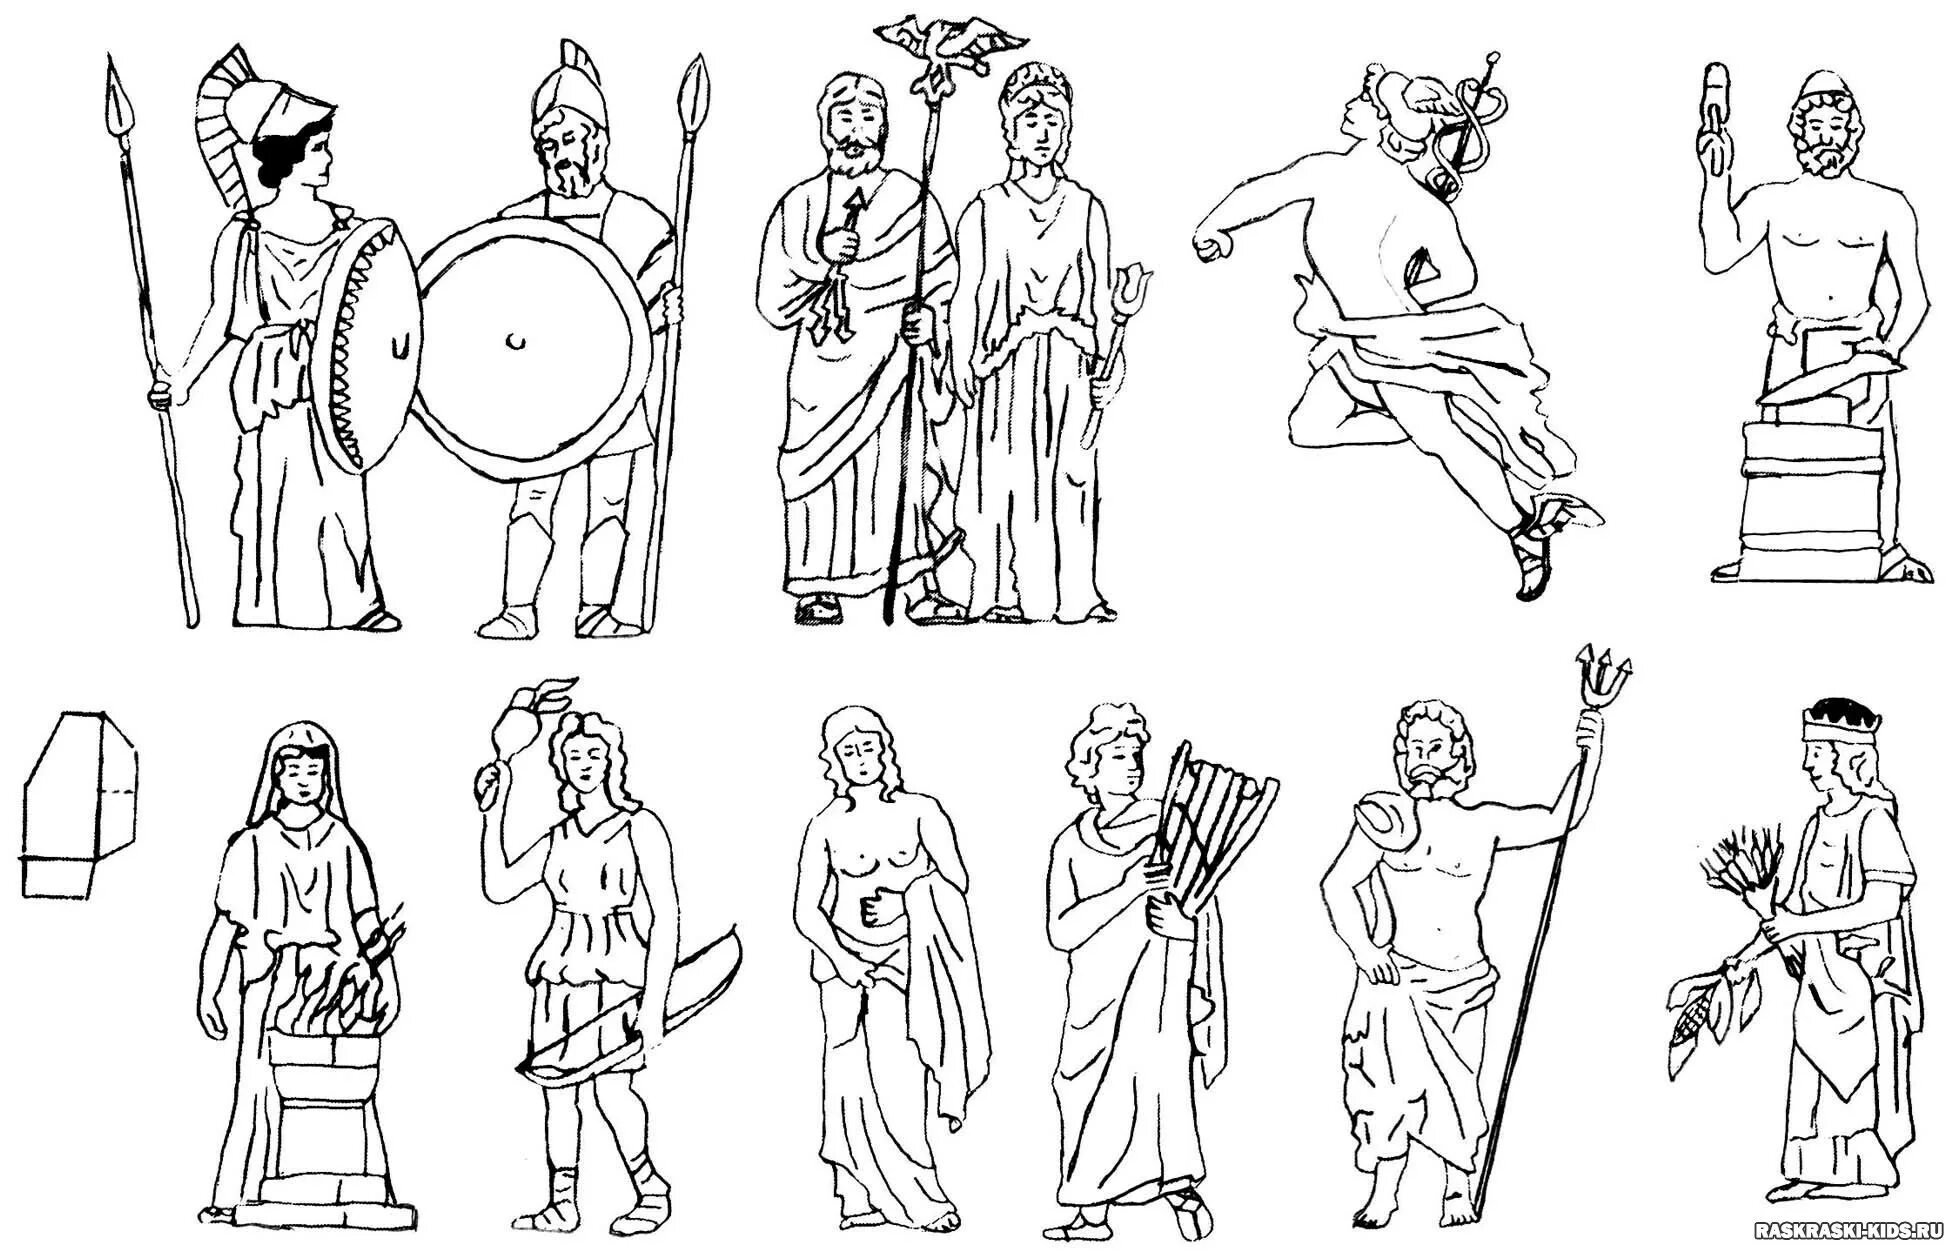 Dazzling ancient greece coloring book for kids